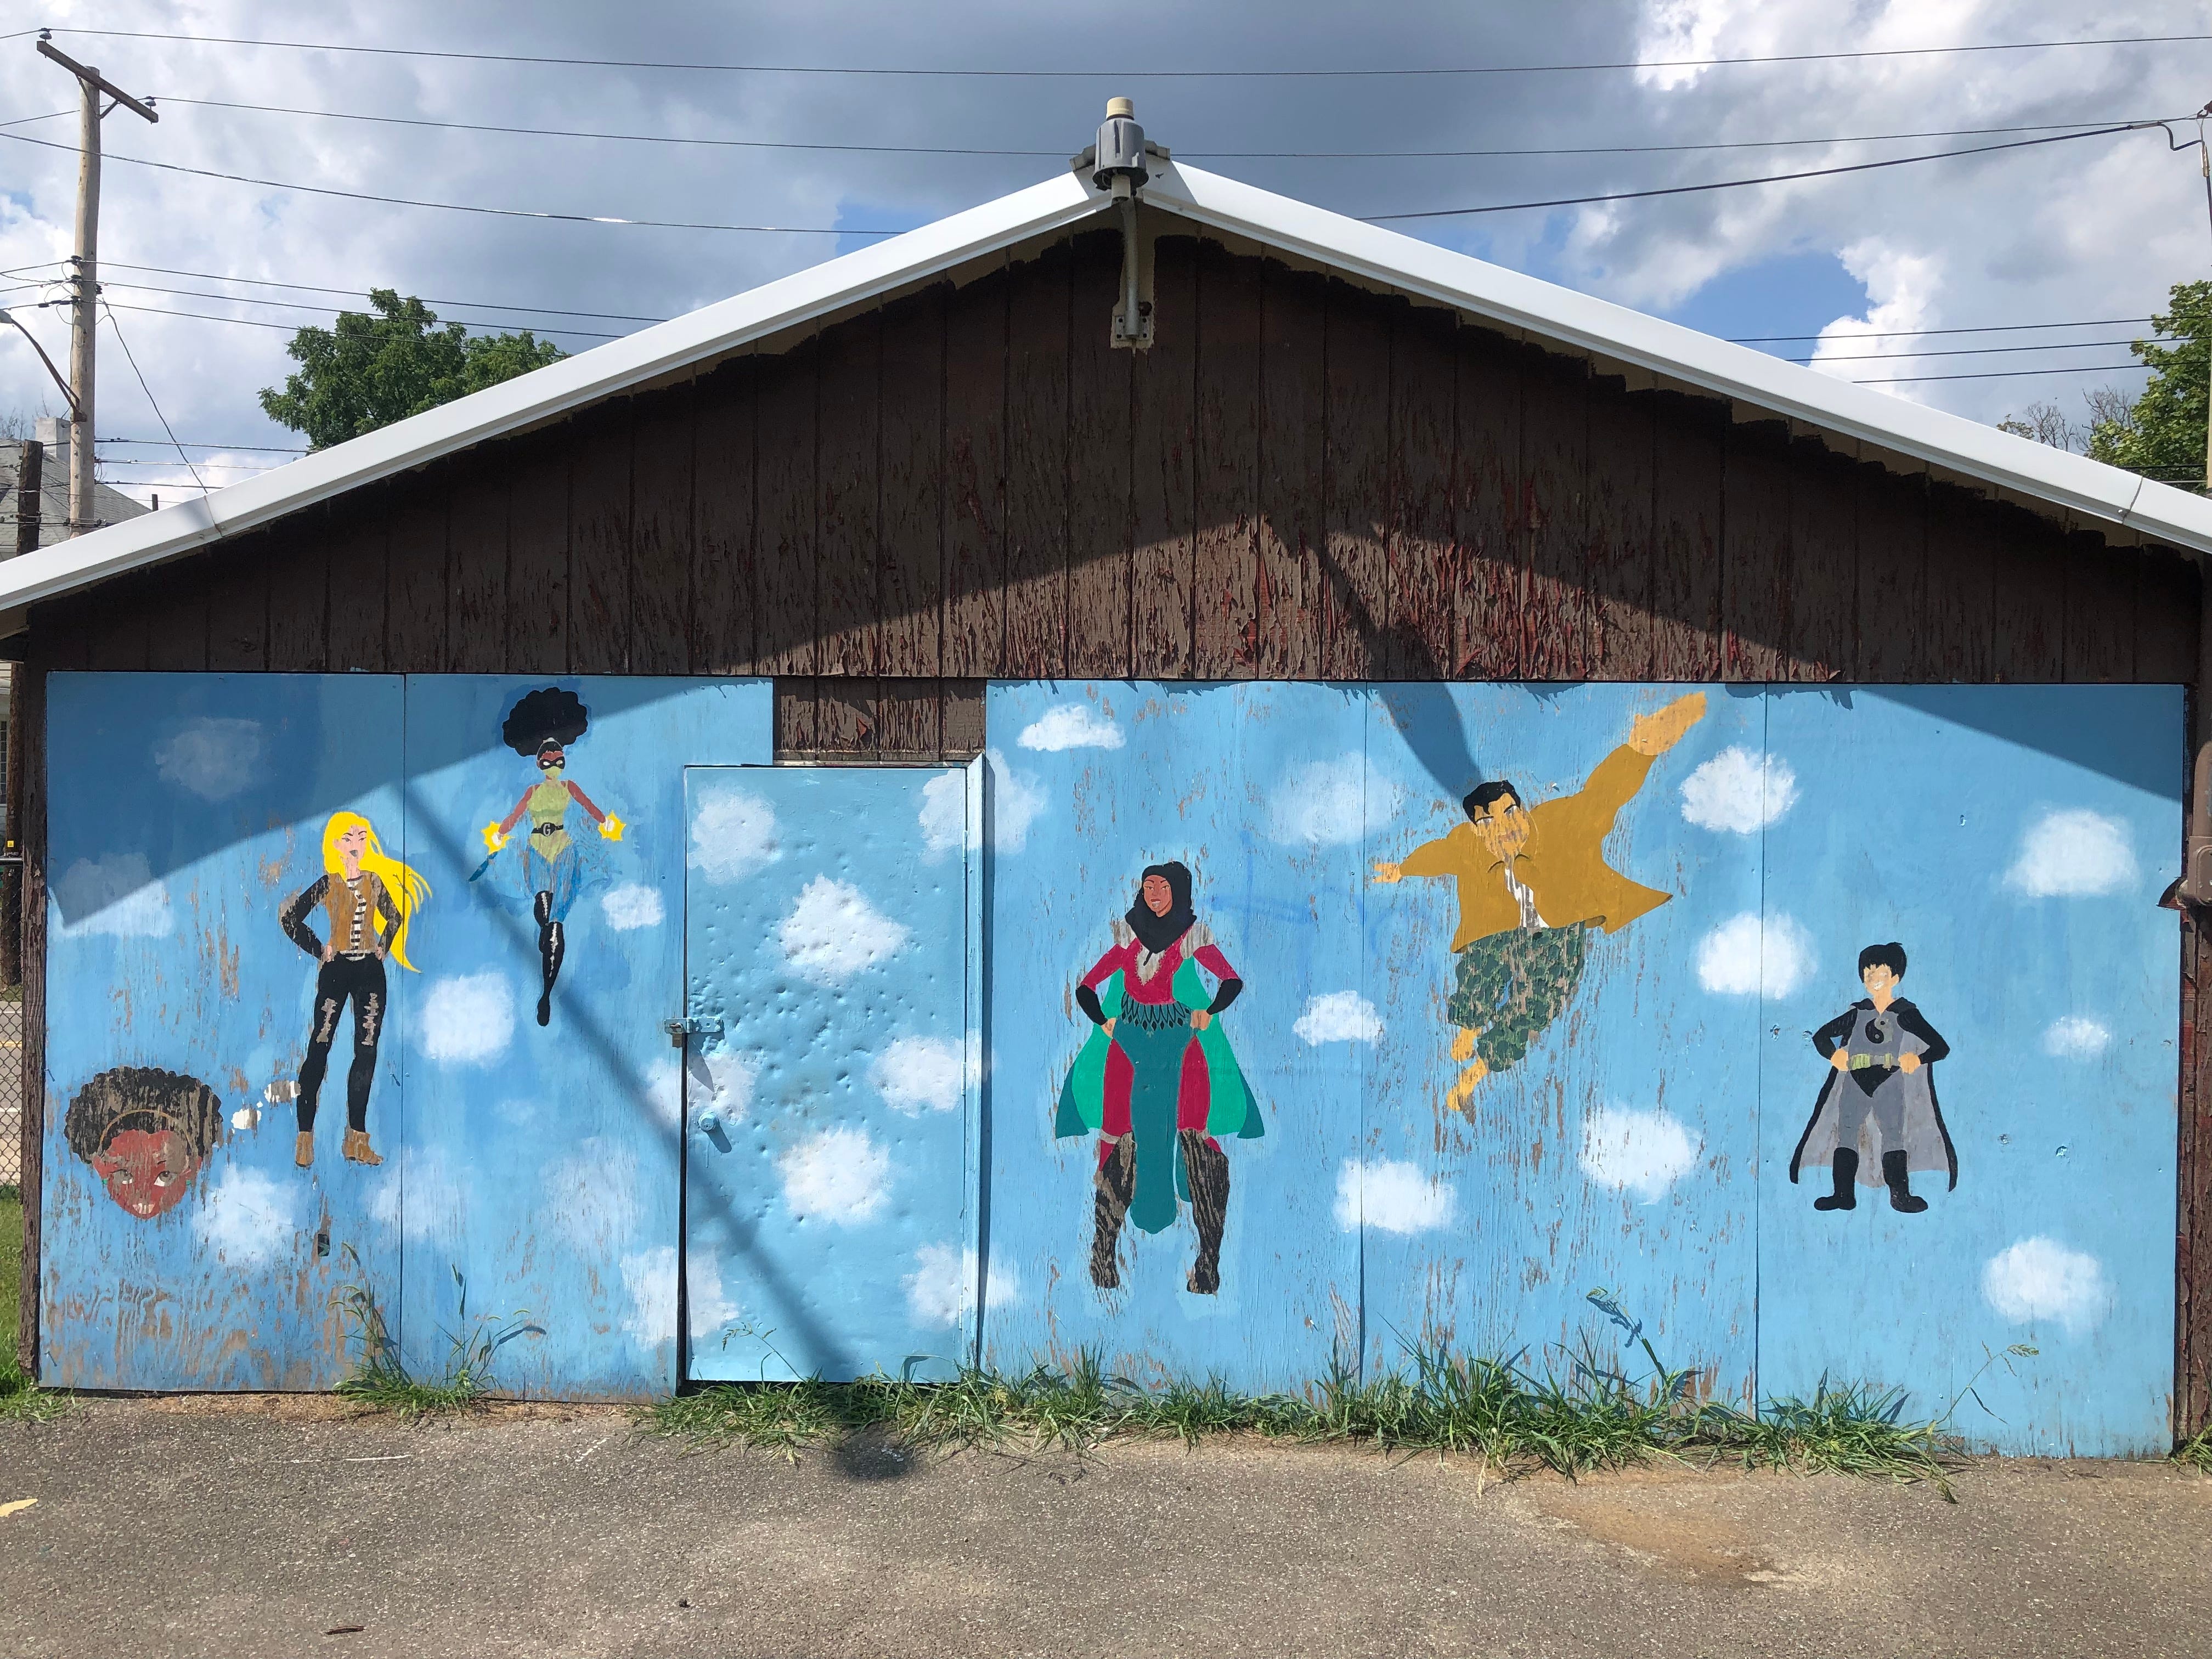 Kareemah Scurry completed this painting of superheroes in Floral Ave. Park at 200 Floral Ave. in Johnson City in 2018.